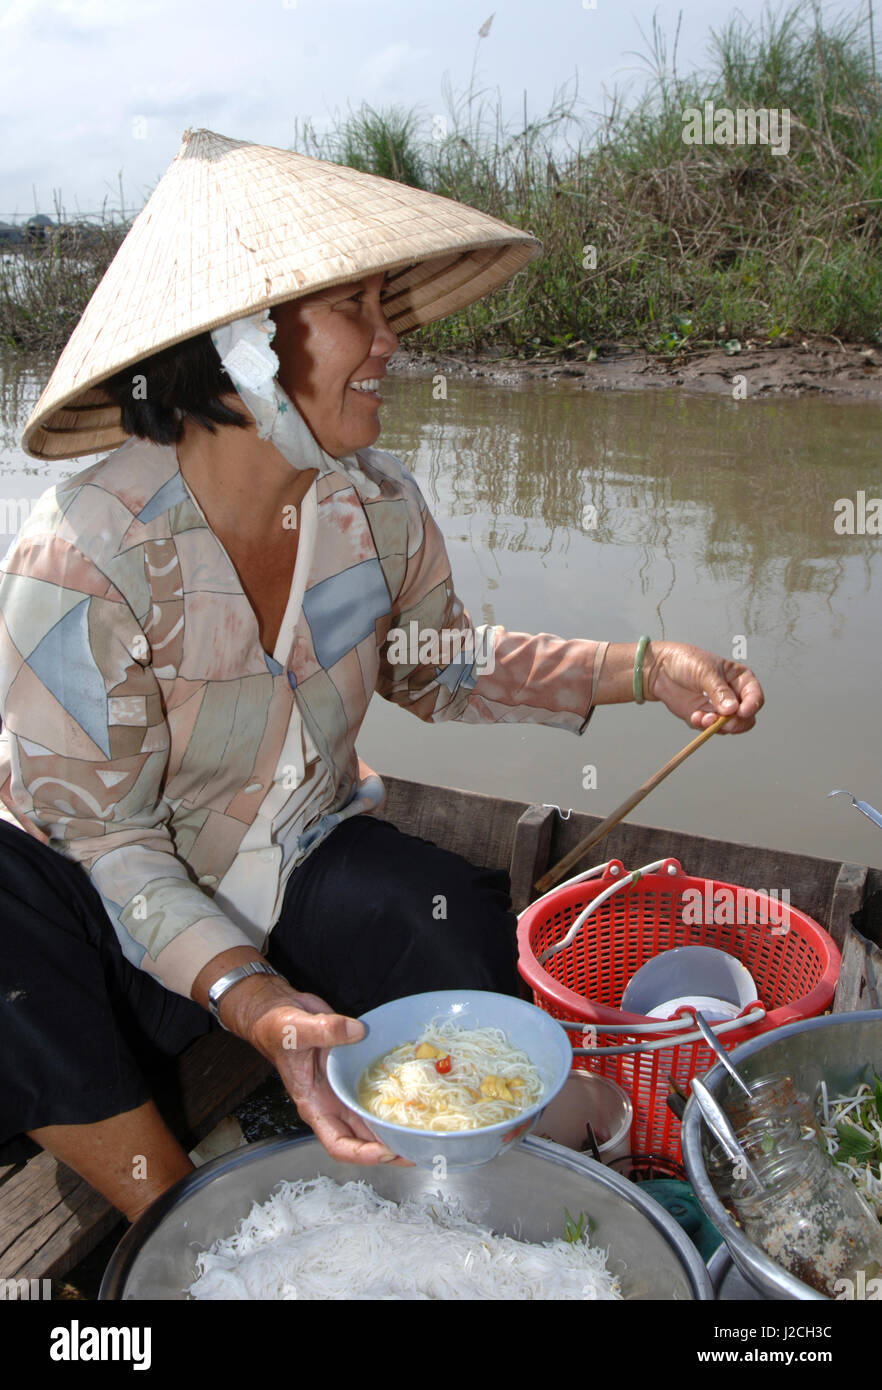 Asia, Vietnam. Women preparing pho from a boat at the market, Chau Doc (Editorial Usage Only) Stock Photo